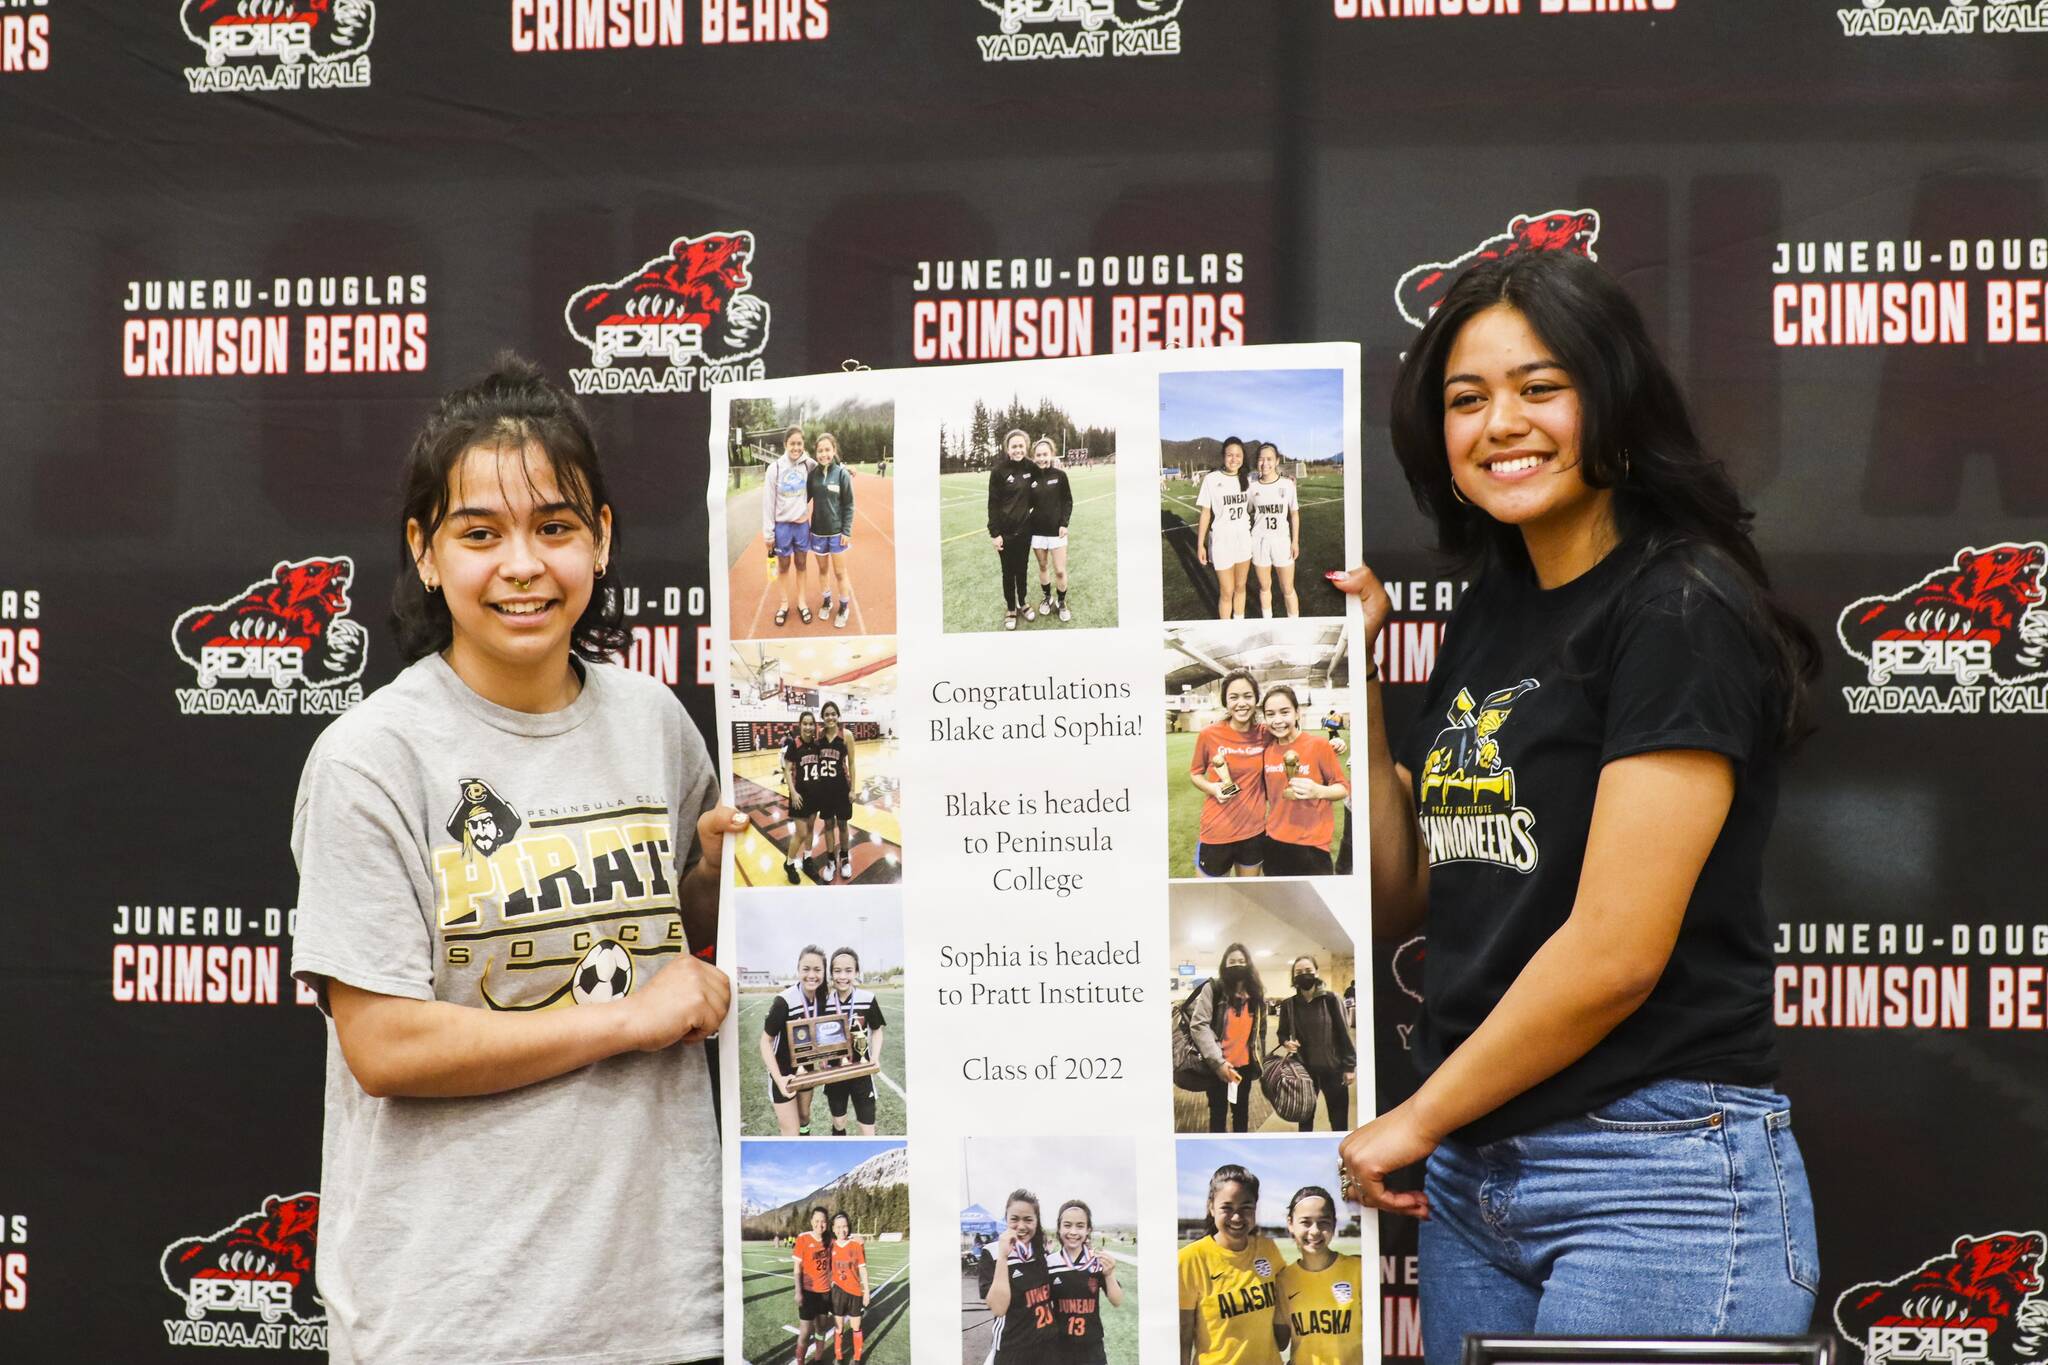 JDHS girls soccer players Blake Plummer, left, and Sophia Pugh who just signed their letters of intent to play college soccer at separate schools, pose with a tribute to their long time playing together on May 9, 2022. (Michael S. Lockett / Juneau Empire)